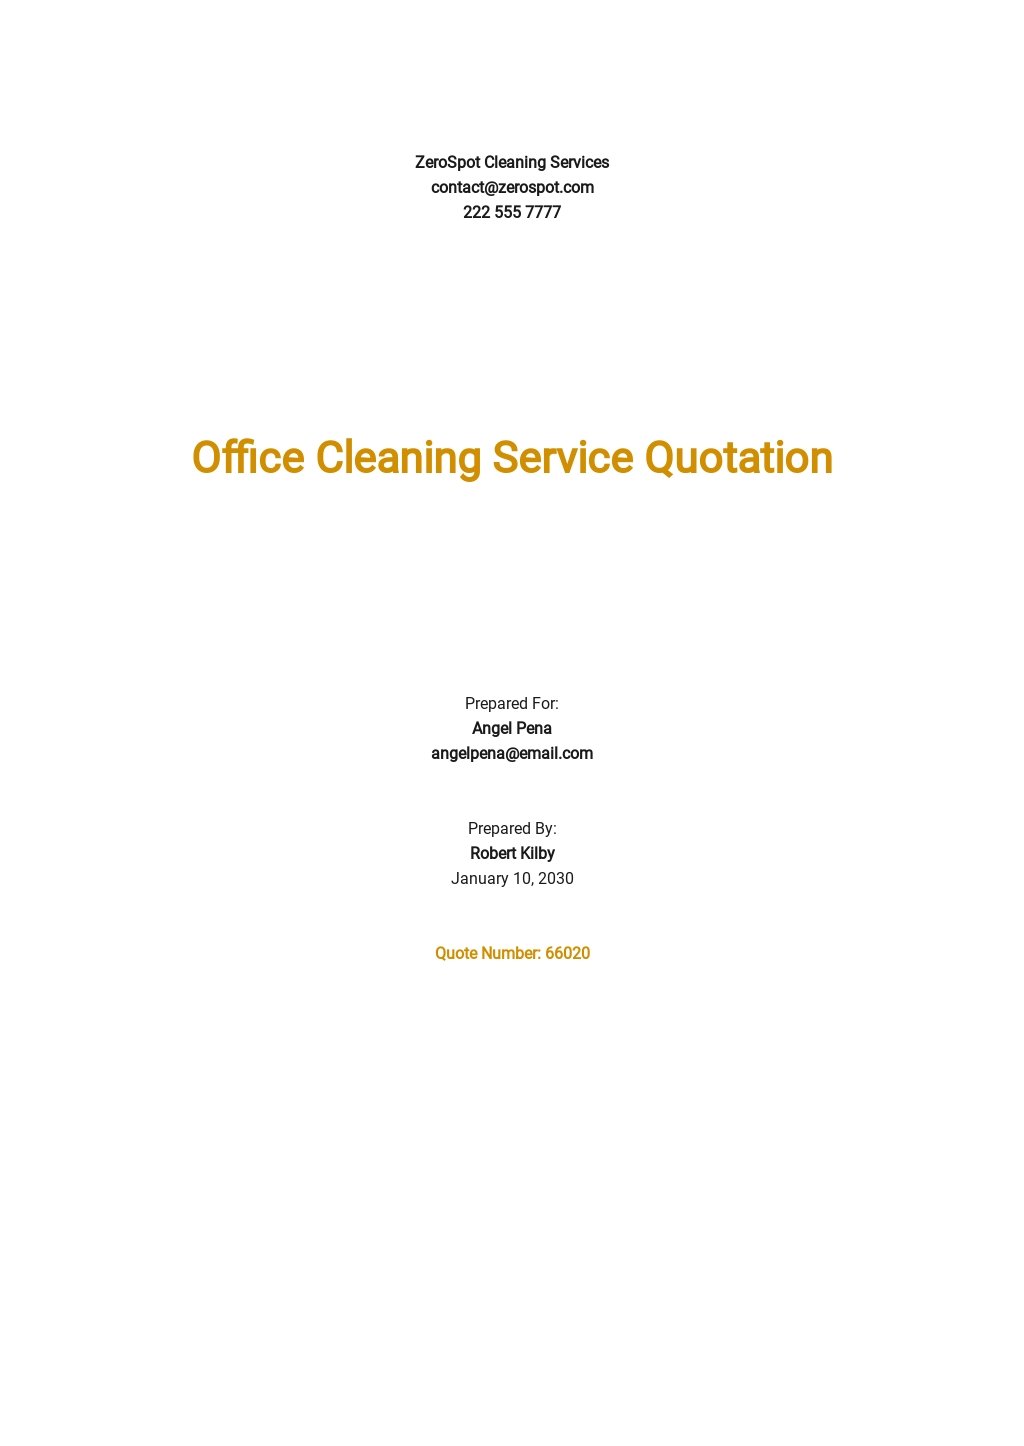 Quotation for Office Cleaning Services Template.jpe